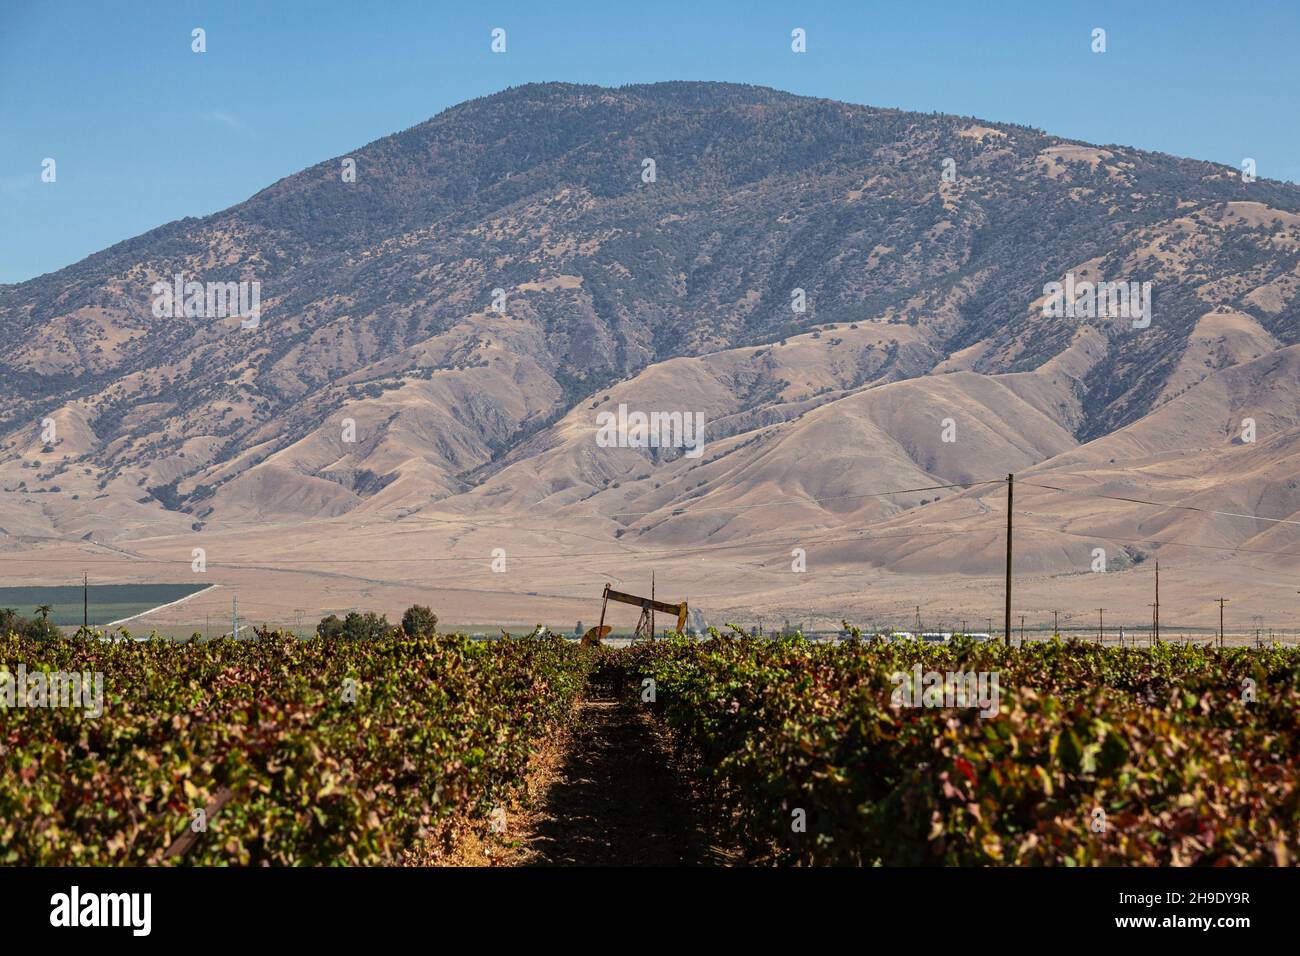 Oil well in crop field, Arvin, Kern County, California, USA Stock Photo